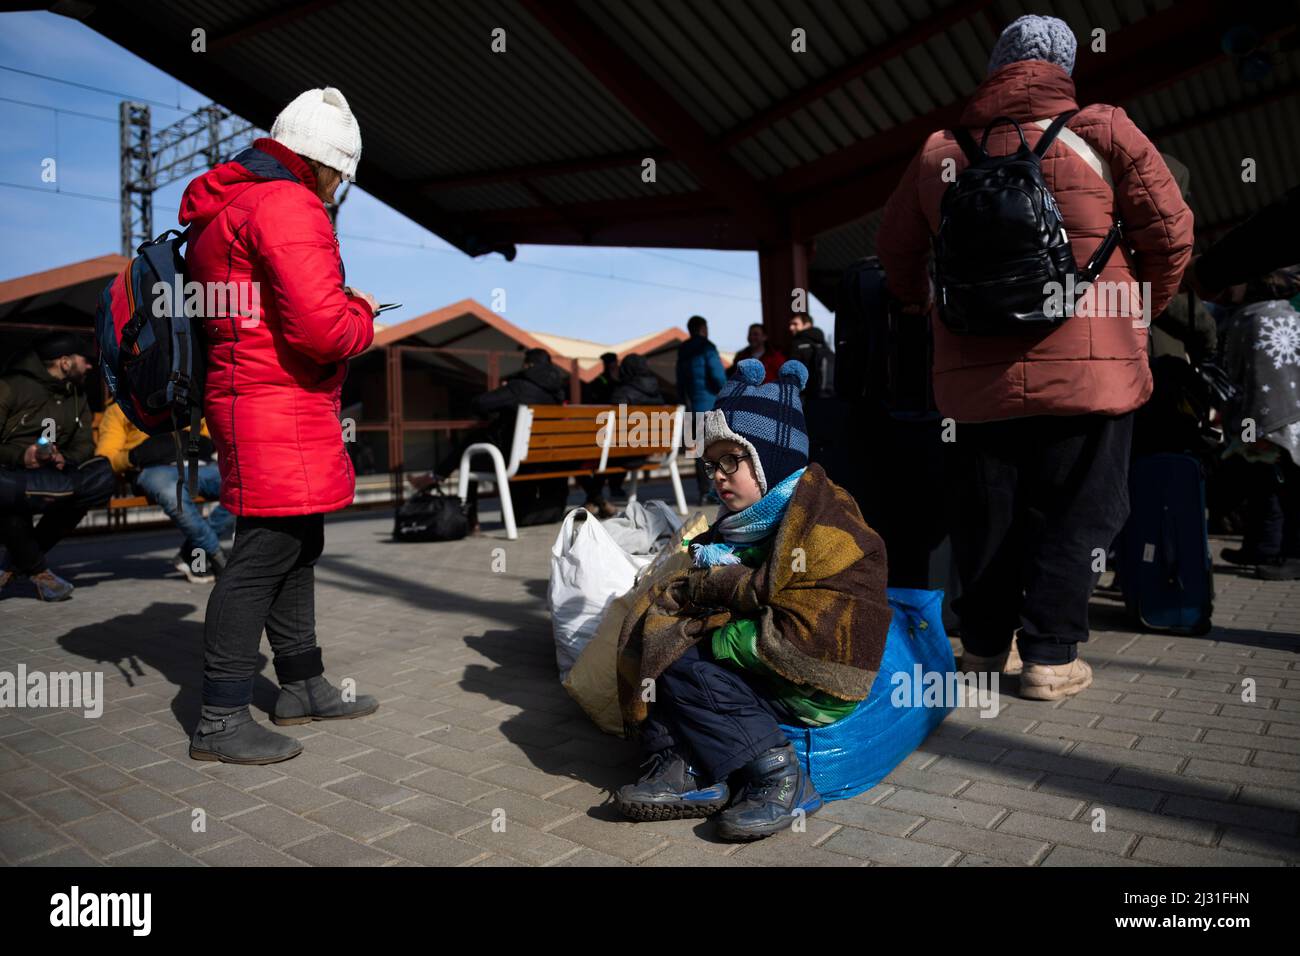 War refugees from Ukraine, who cross into Poland, wait for train at the Przemysl station, Tuesday, March 1, 2022. Russia's military assault on Ukraine Stock Photo